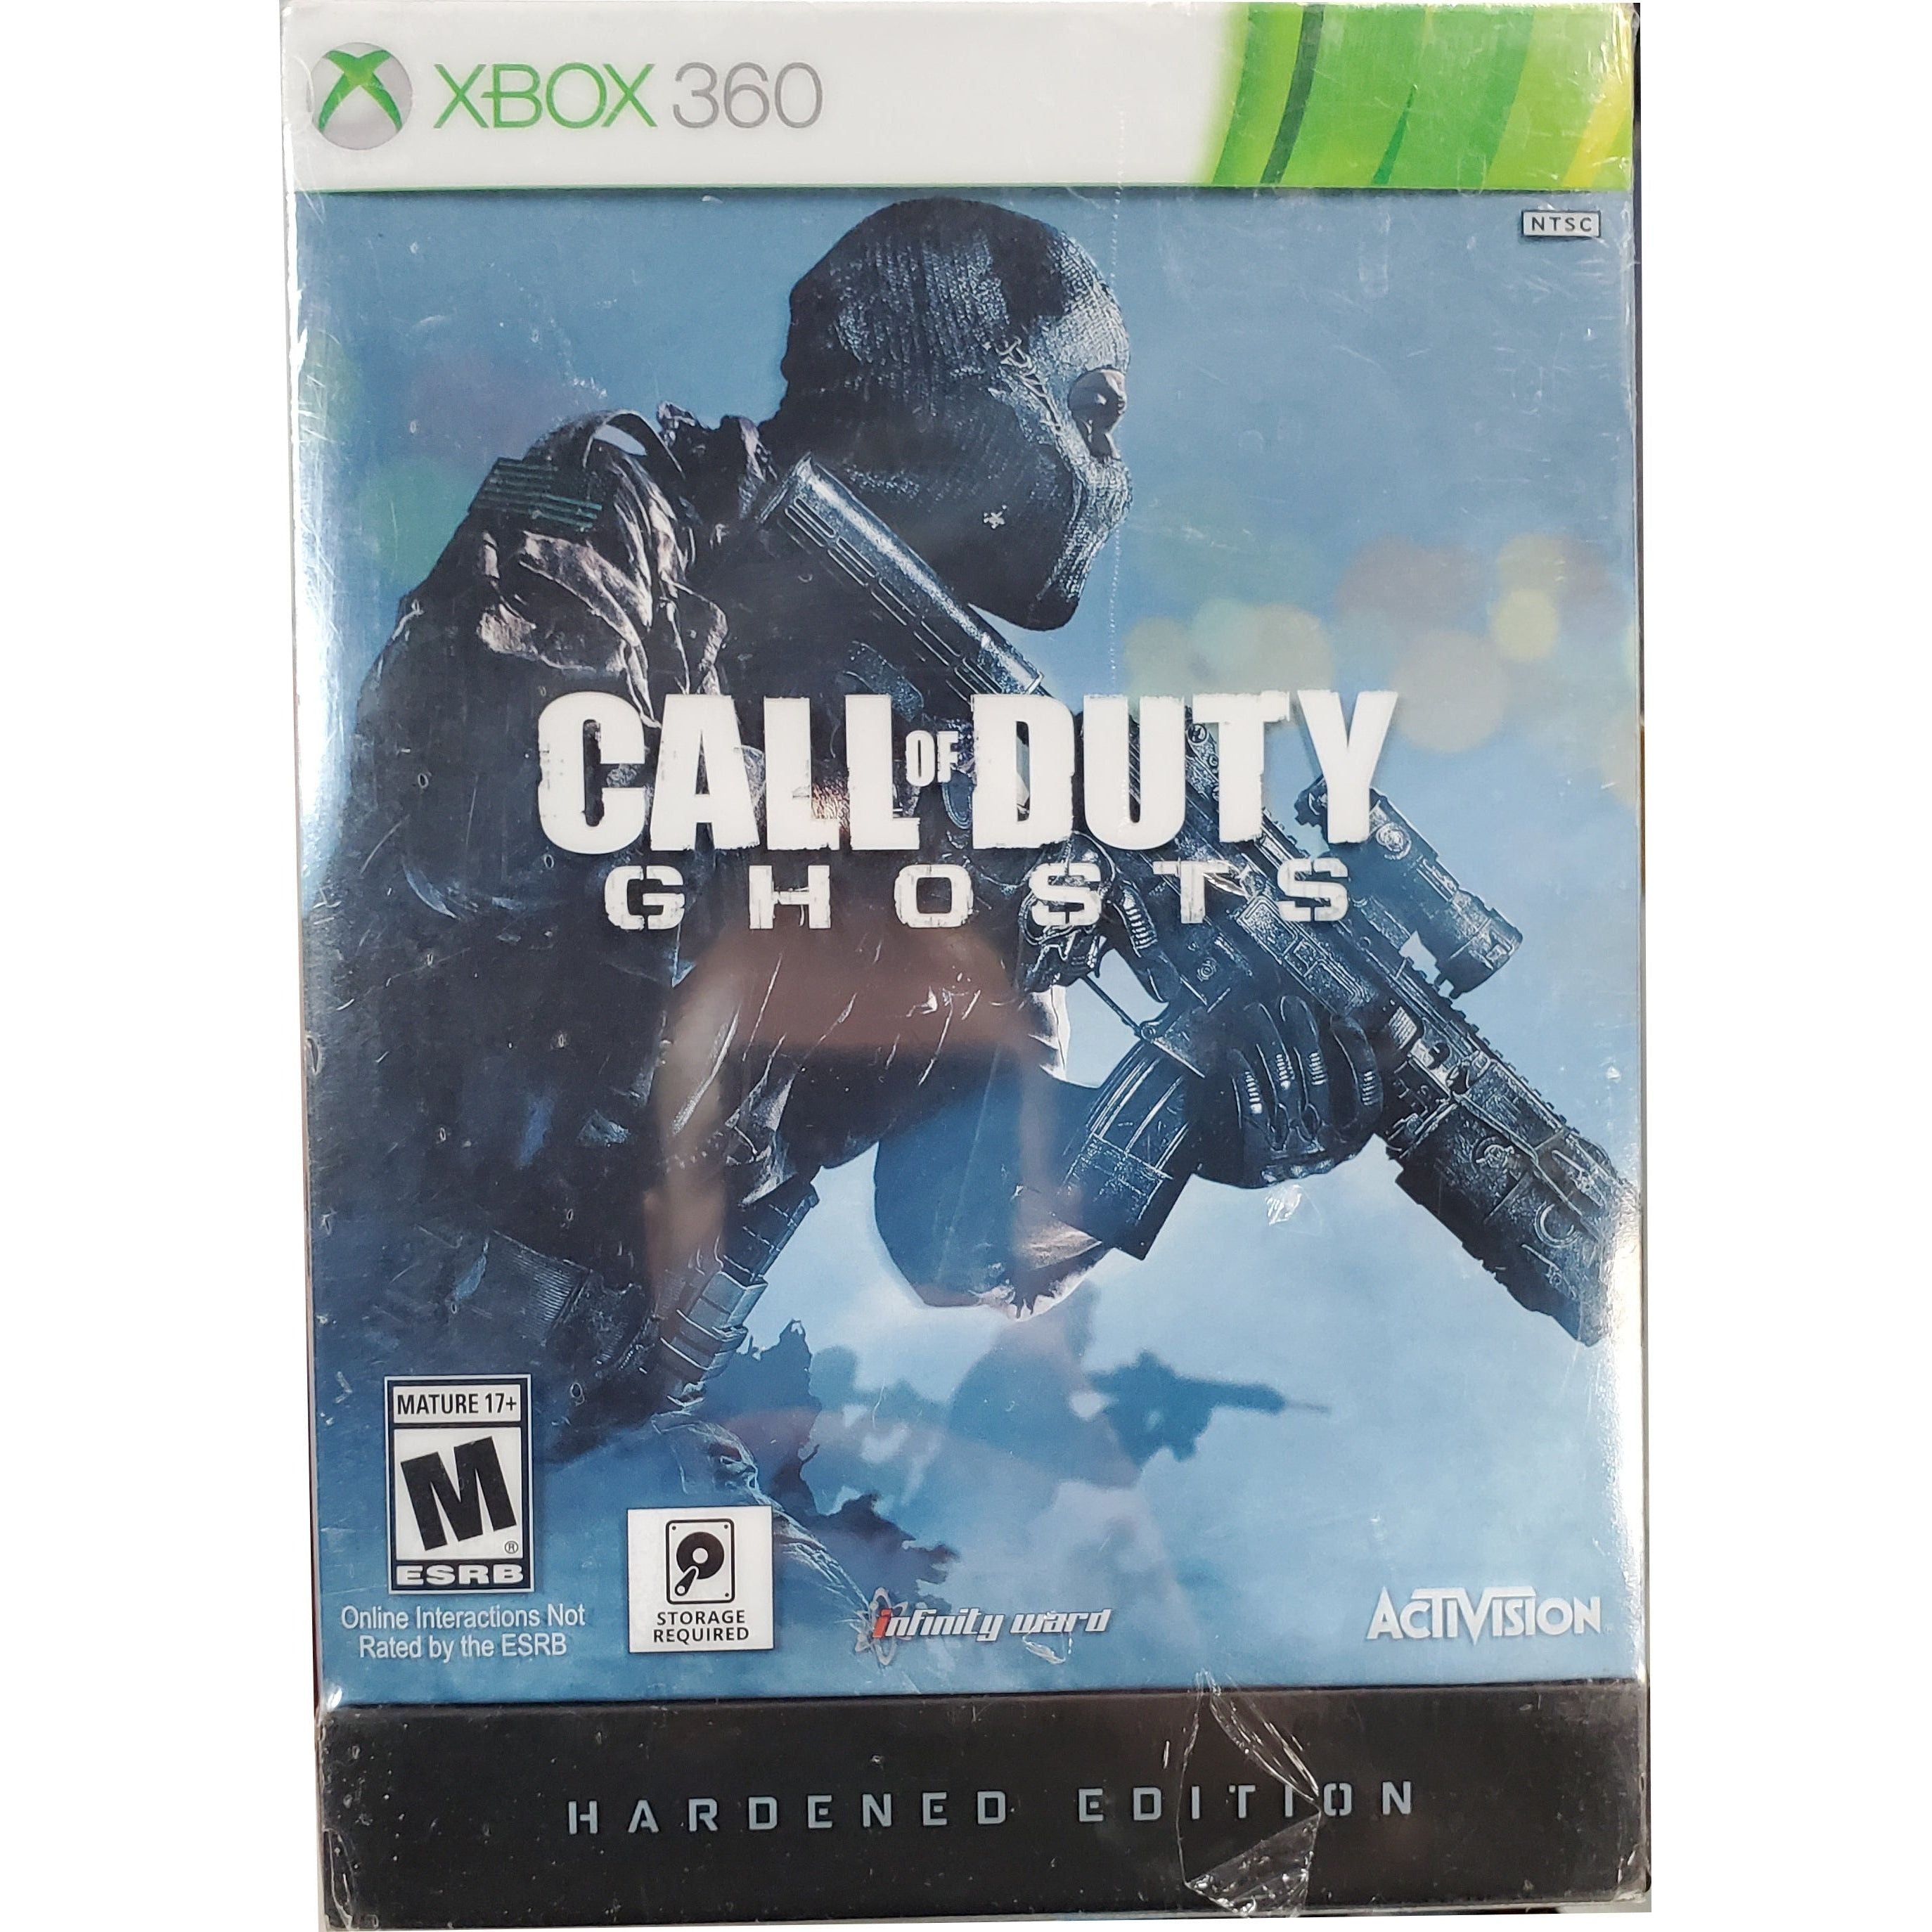 XBOX 360 - Call of Duty Ghosts Hardened Edition (scellé)